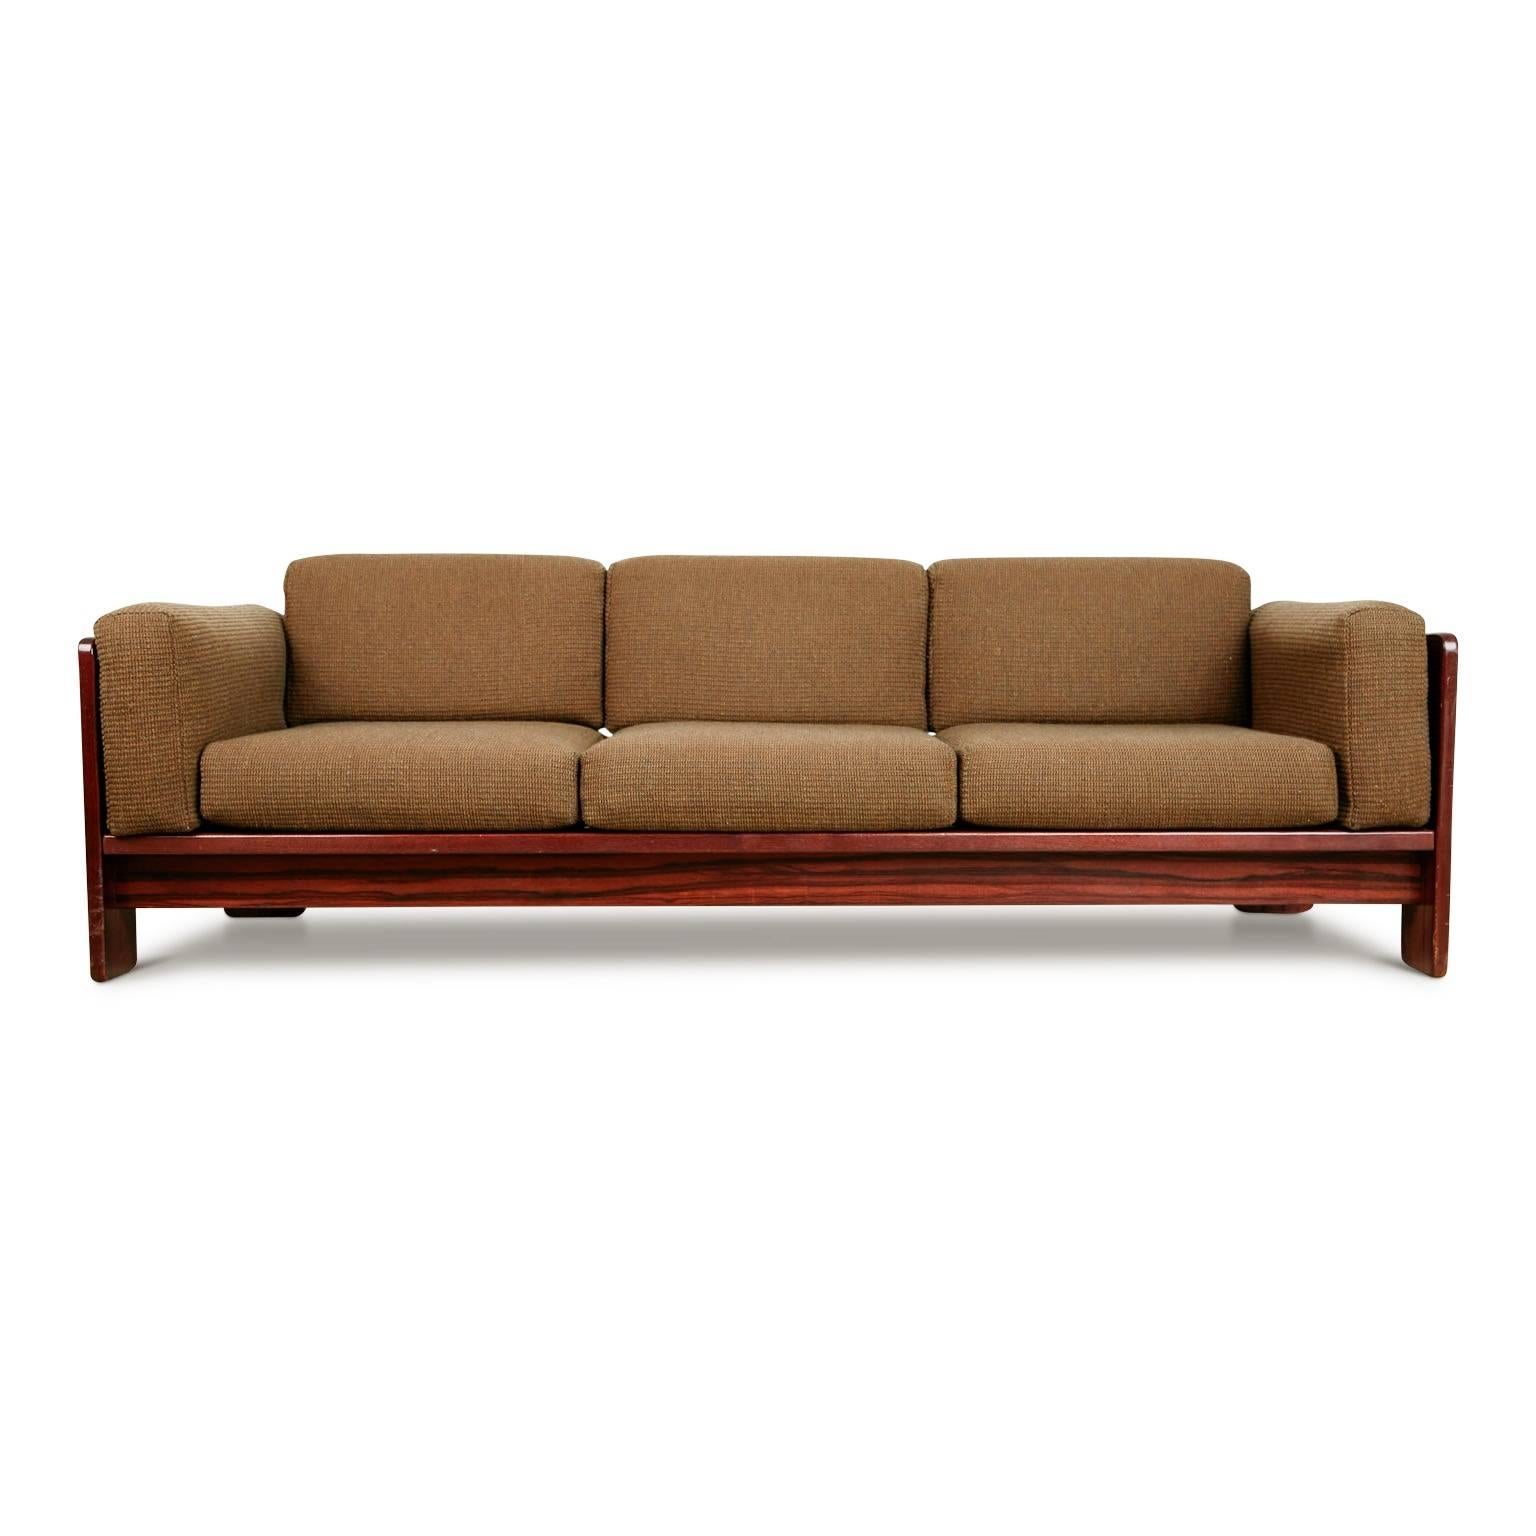 Recently reupholstered and refinished Bastiano sofa by Tobia Scarpa for Gavina. This elegantly crafted sofa has been fabricated from rosewood which displays a beautiful grain, showing a variety of shades and movement in the wood. The back of this